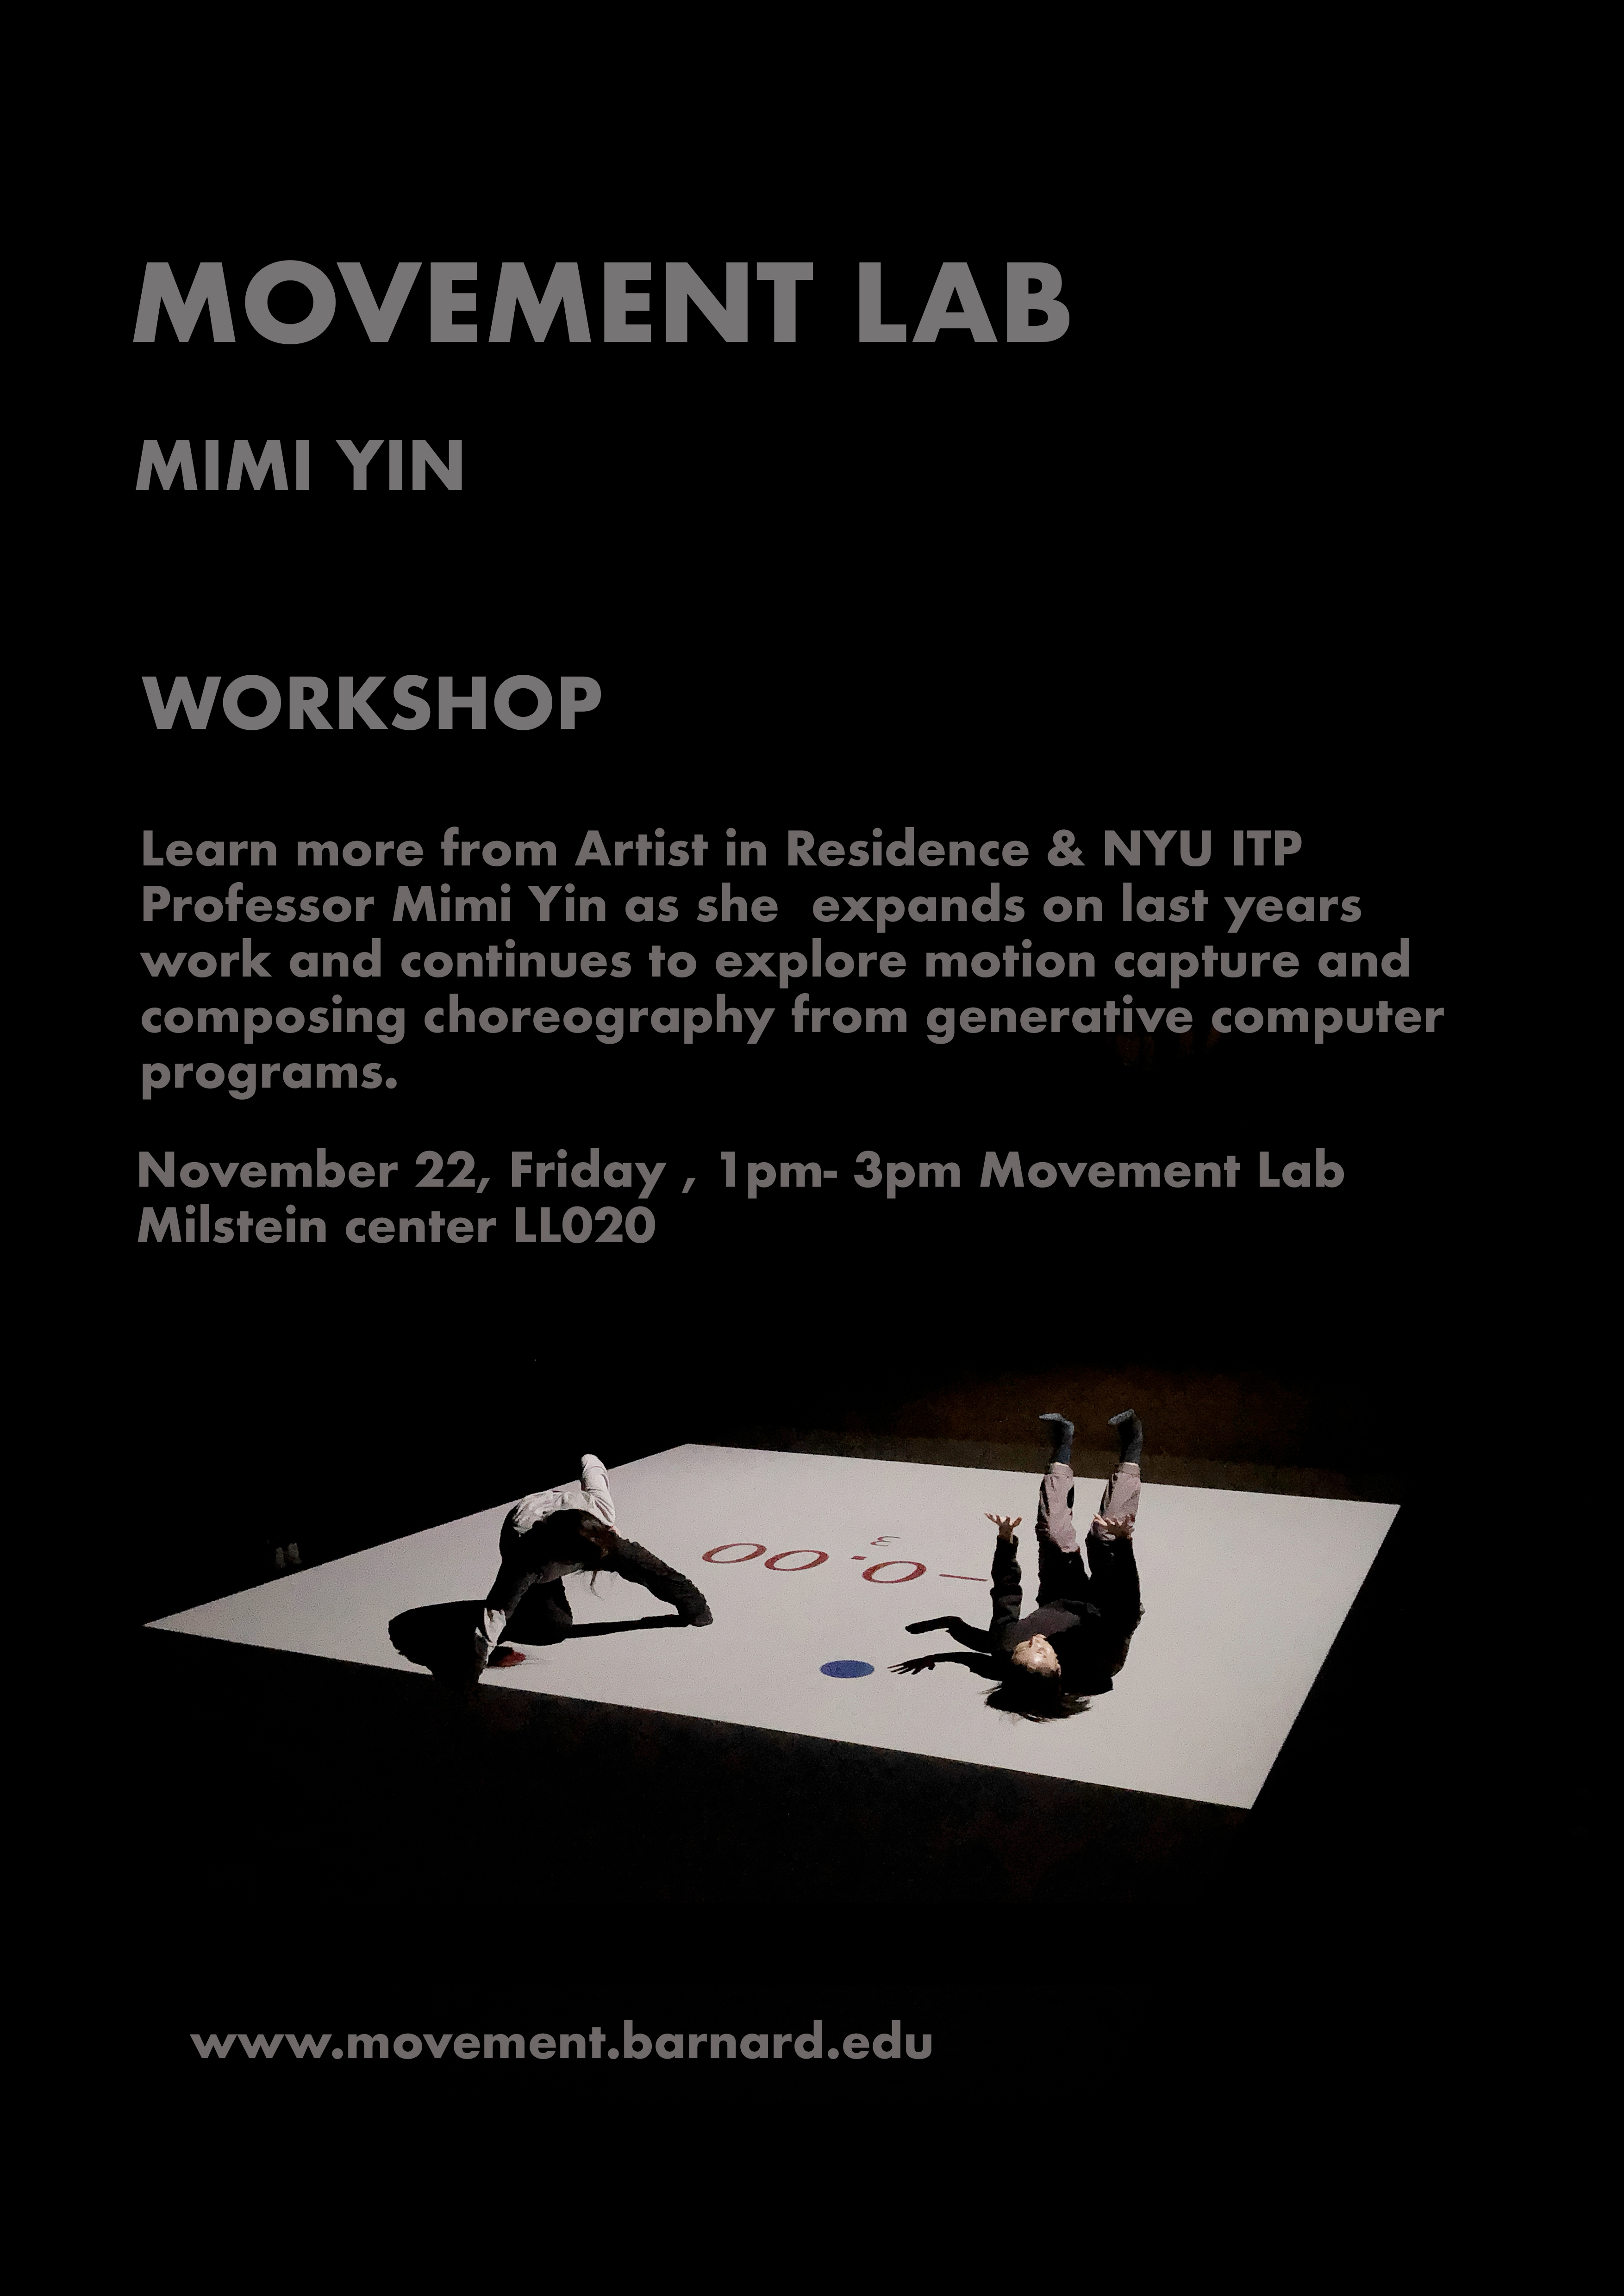 Mimi Yin Workshop poster with previous description. Workshop is on Friday November 22nd from 1-3pm in the Movement Lab, Milstein Center LL020. 